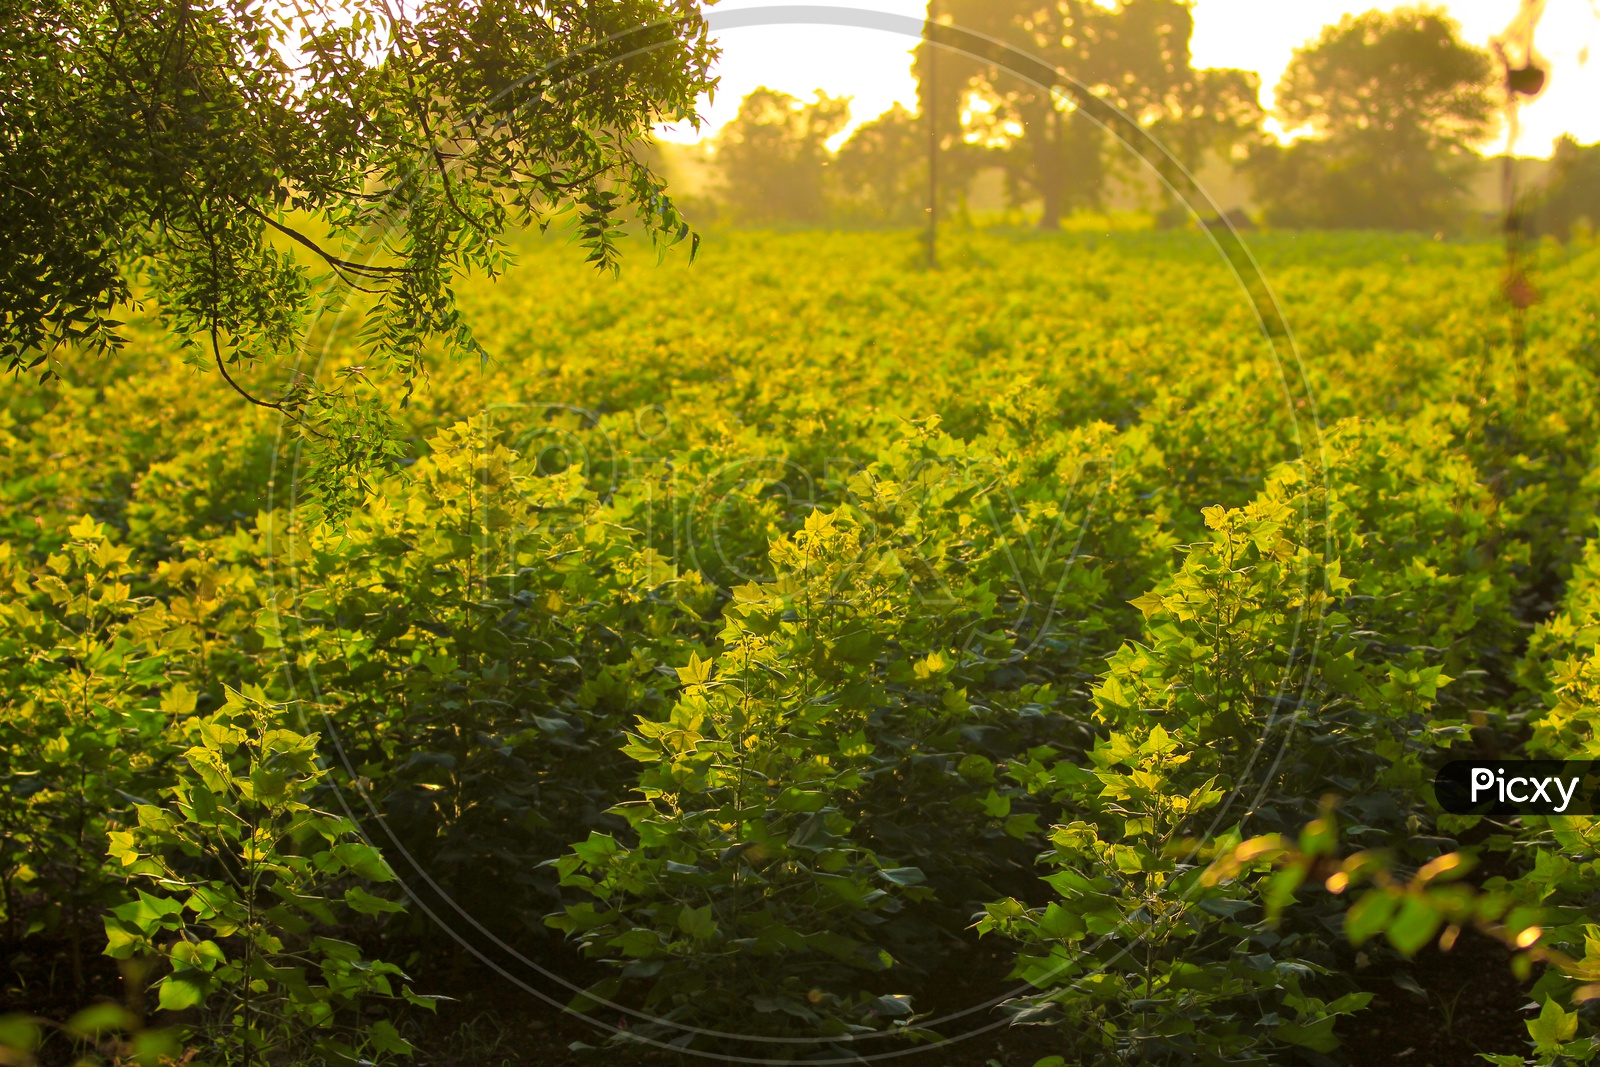 Green Cotton Crop Fields in India with Golden Sunlight on Plants